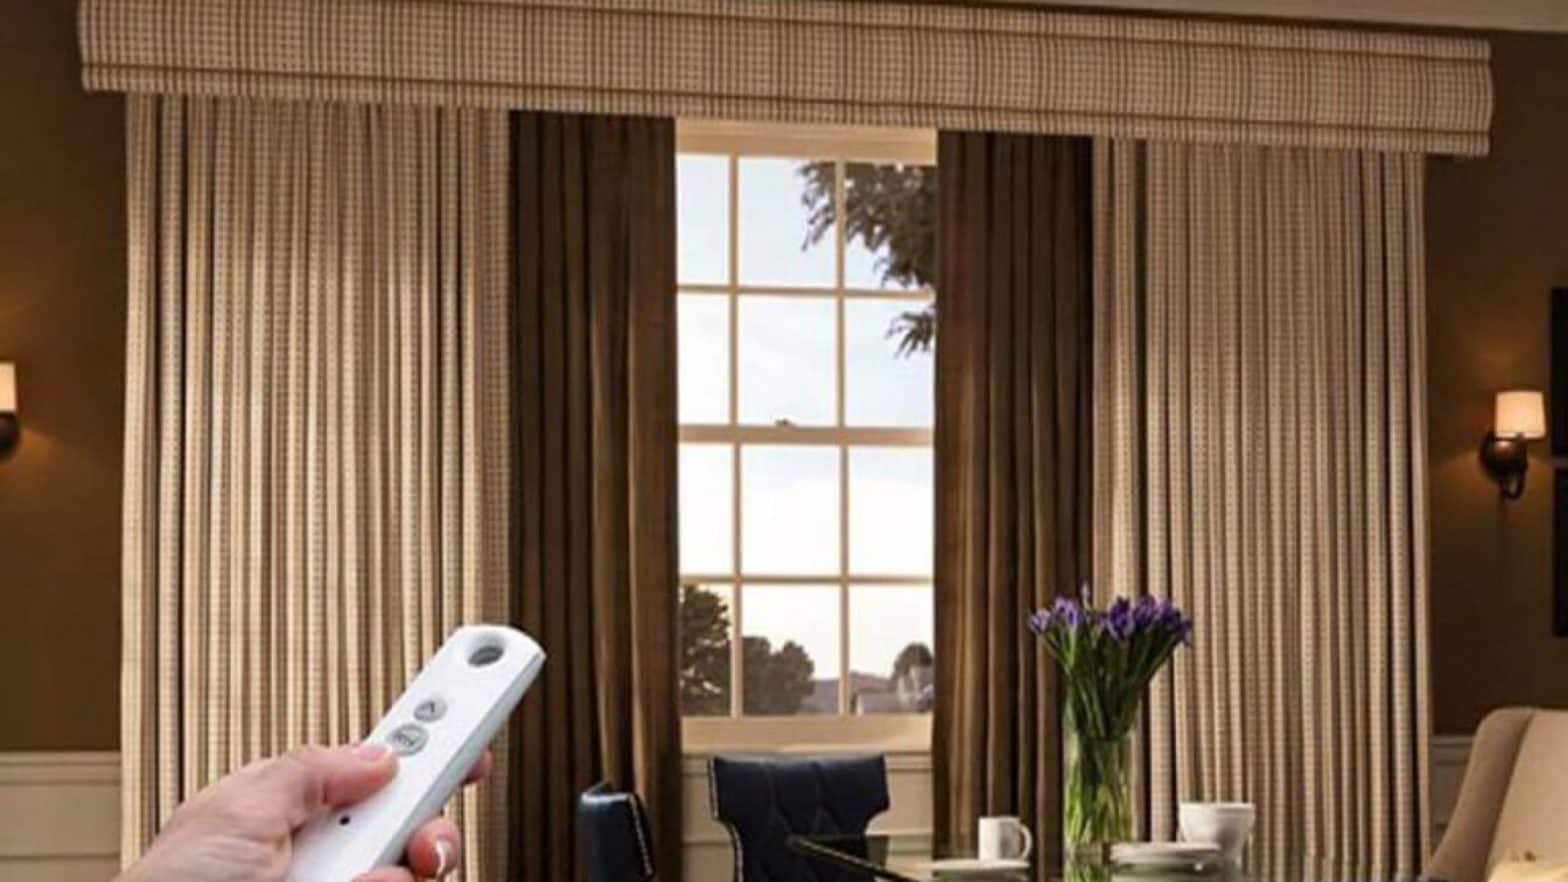 How Motorizеd Curtains Can Hеlp You Accеss Thе Curtains with Easе